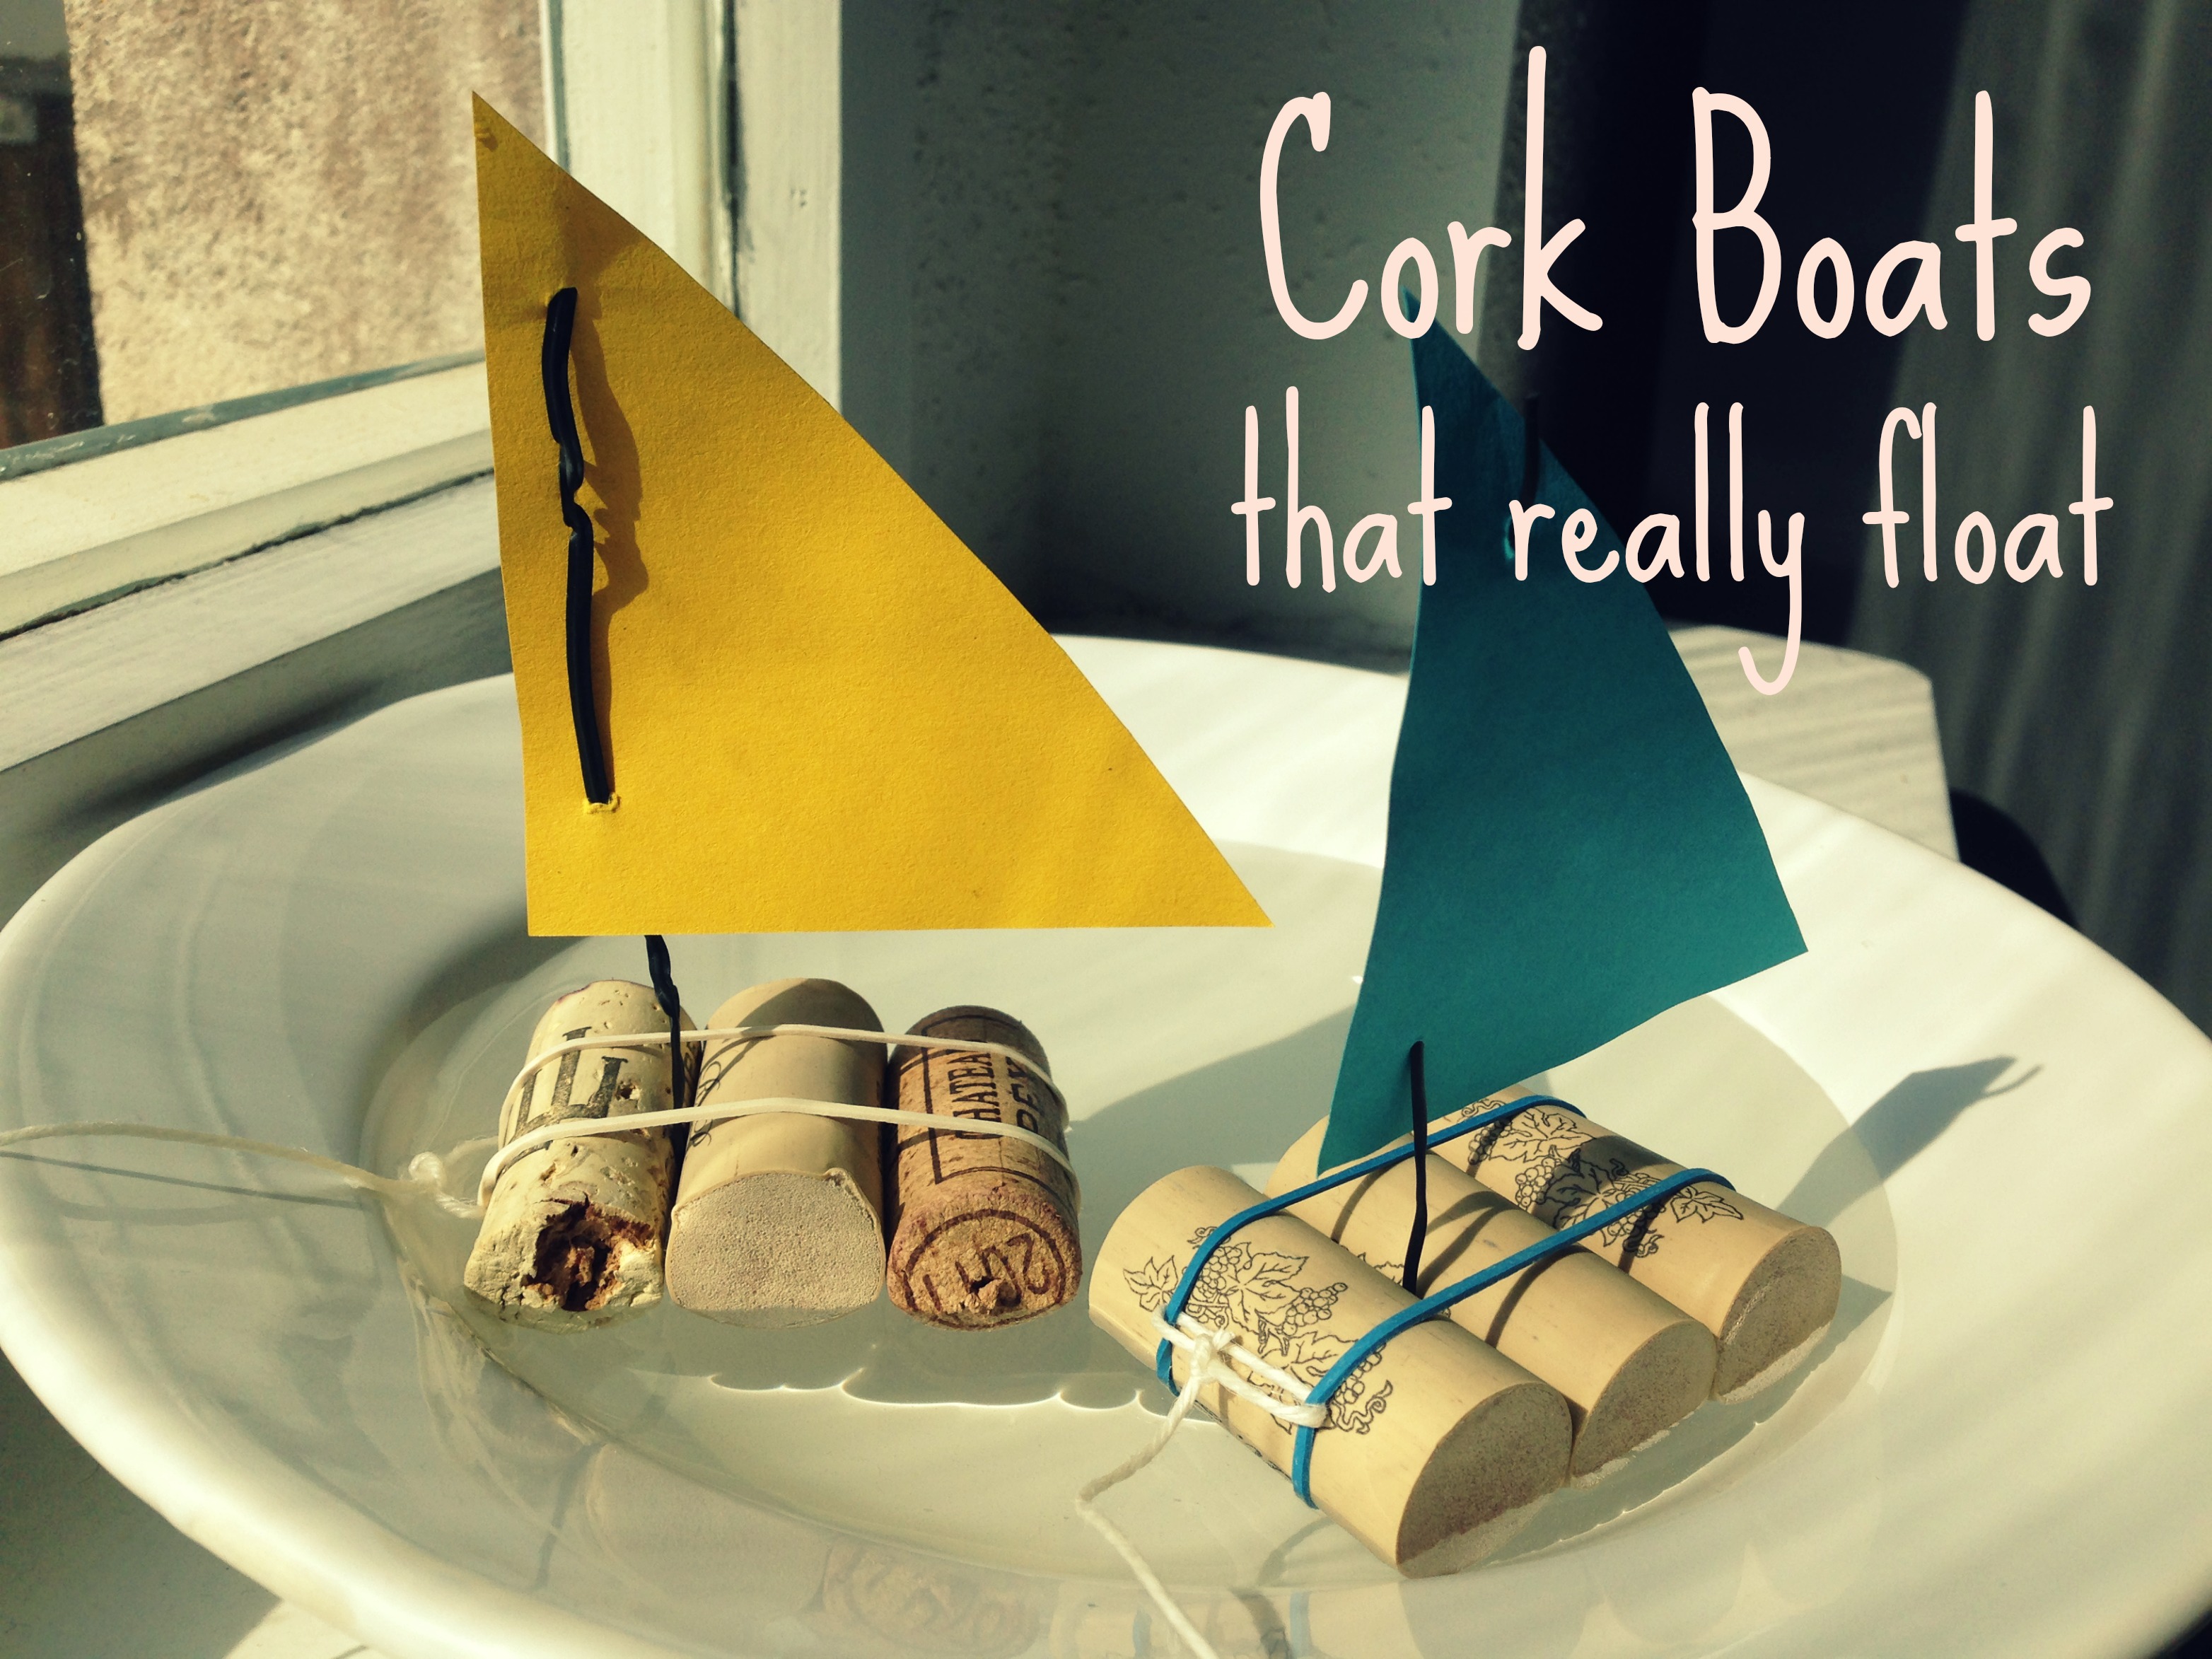 Sail away with your own cork boat